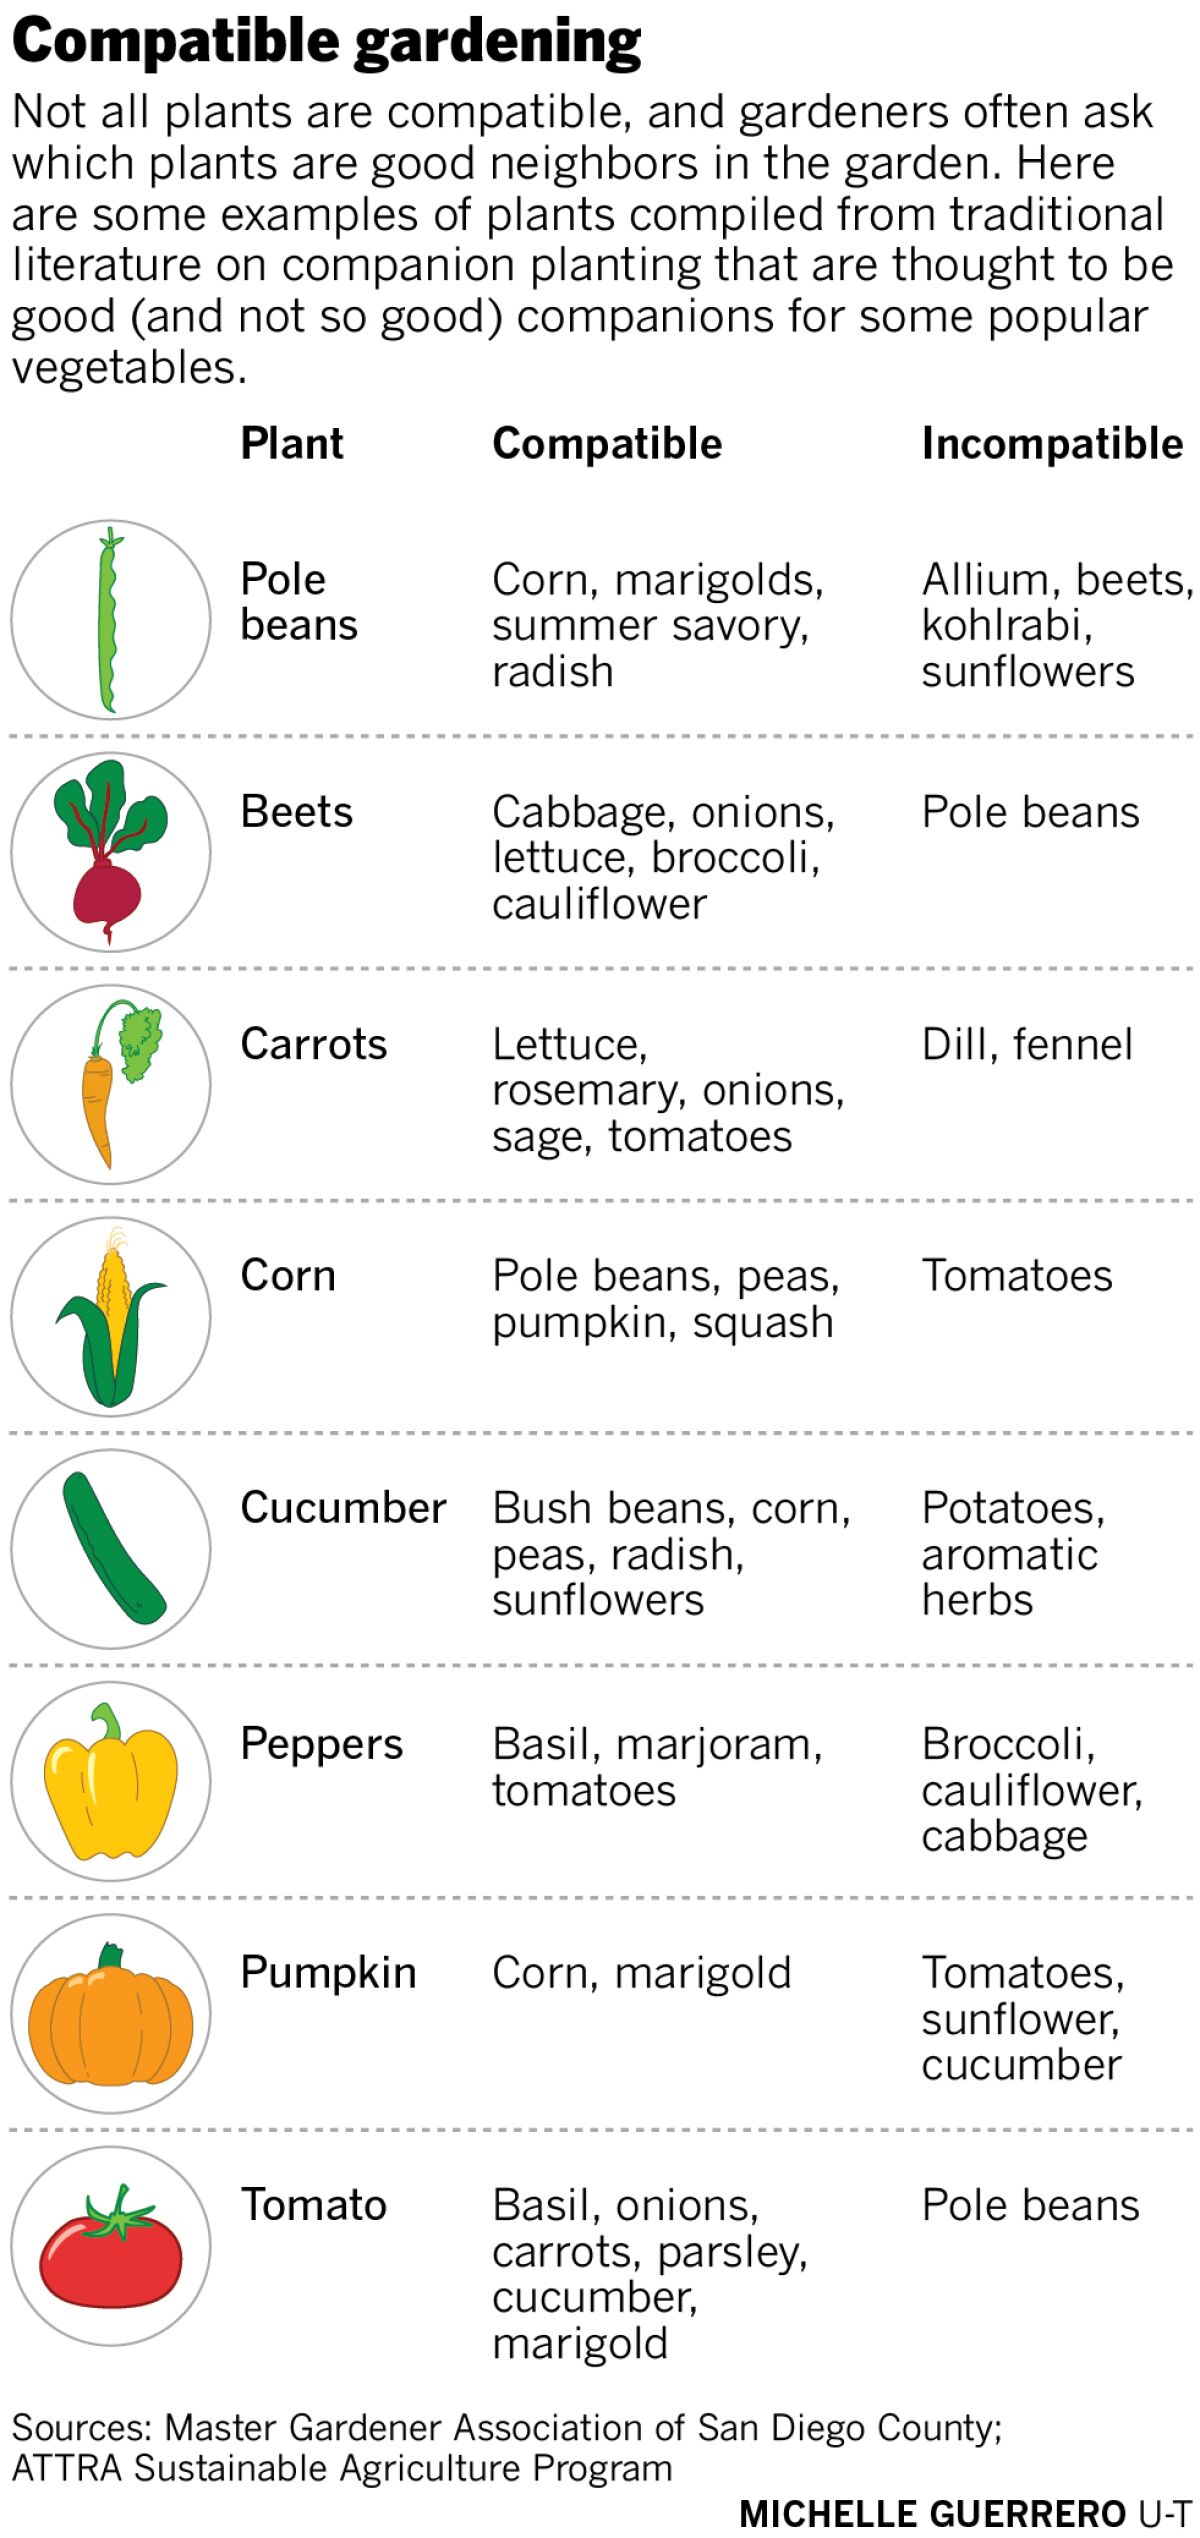 compatible gardening infographic